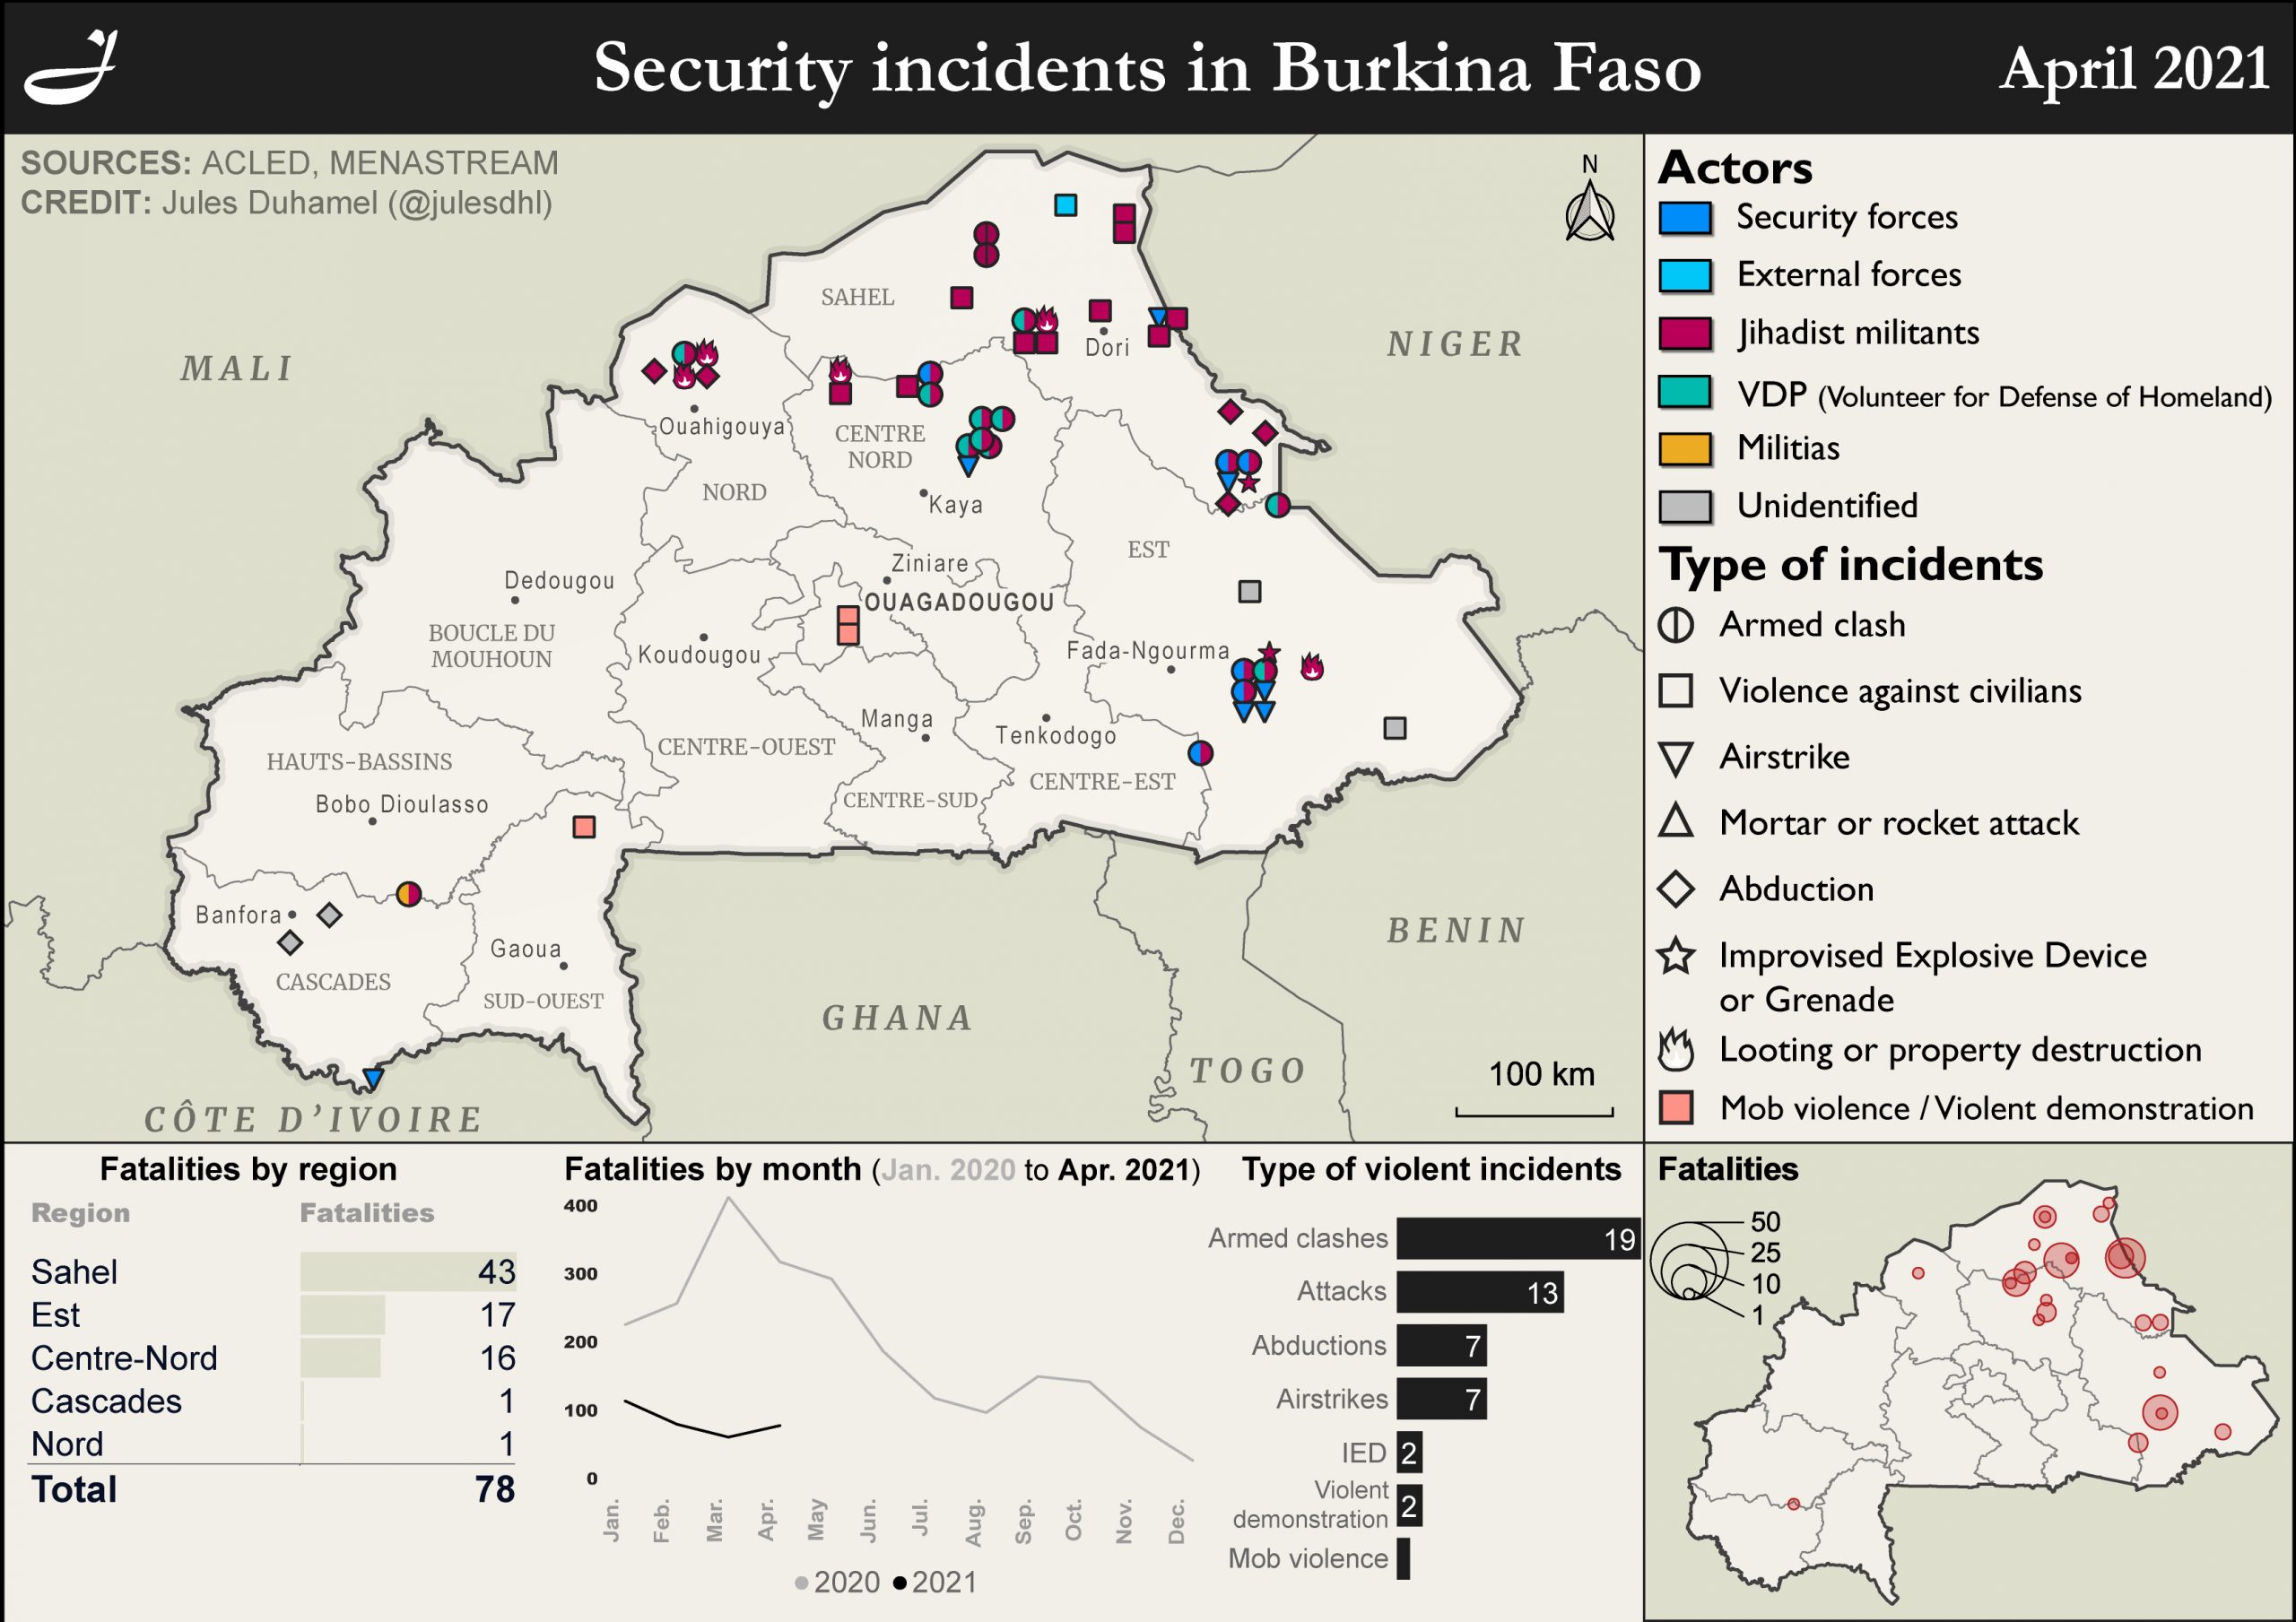 Map of security incidents in Burkina Faso, April 2021